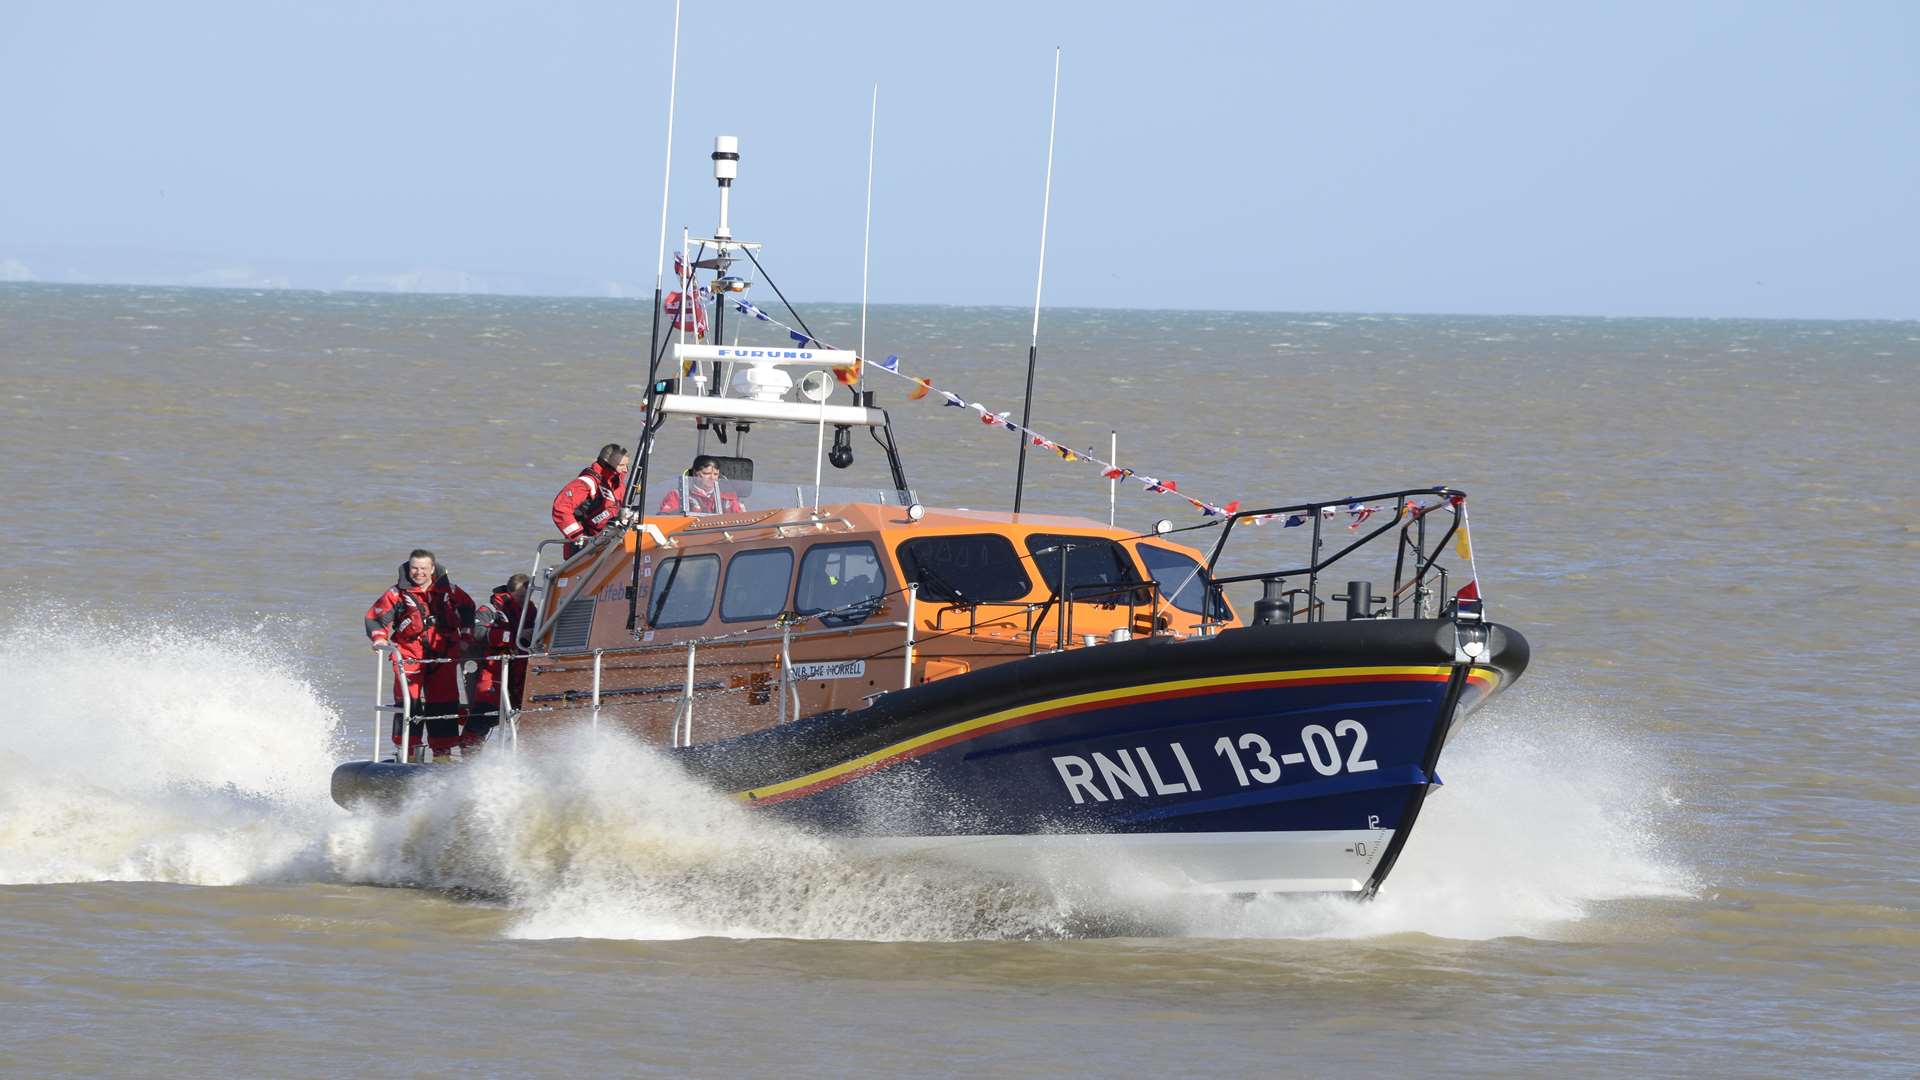 The Dungeness lifeboat The Morrell